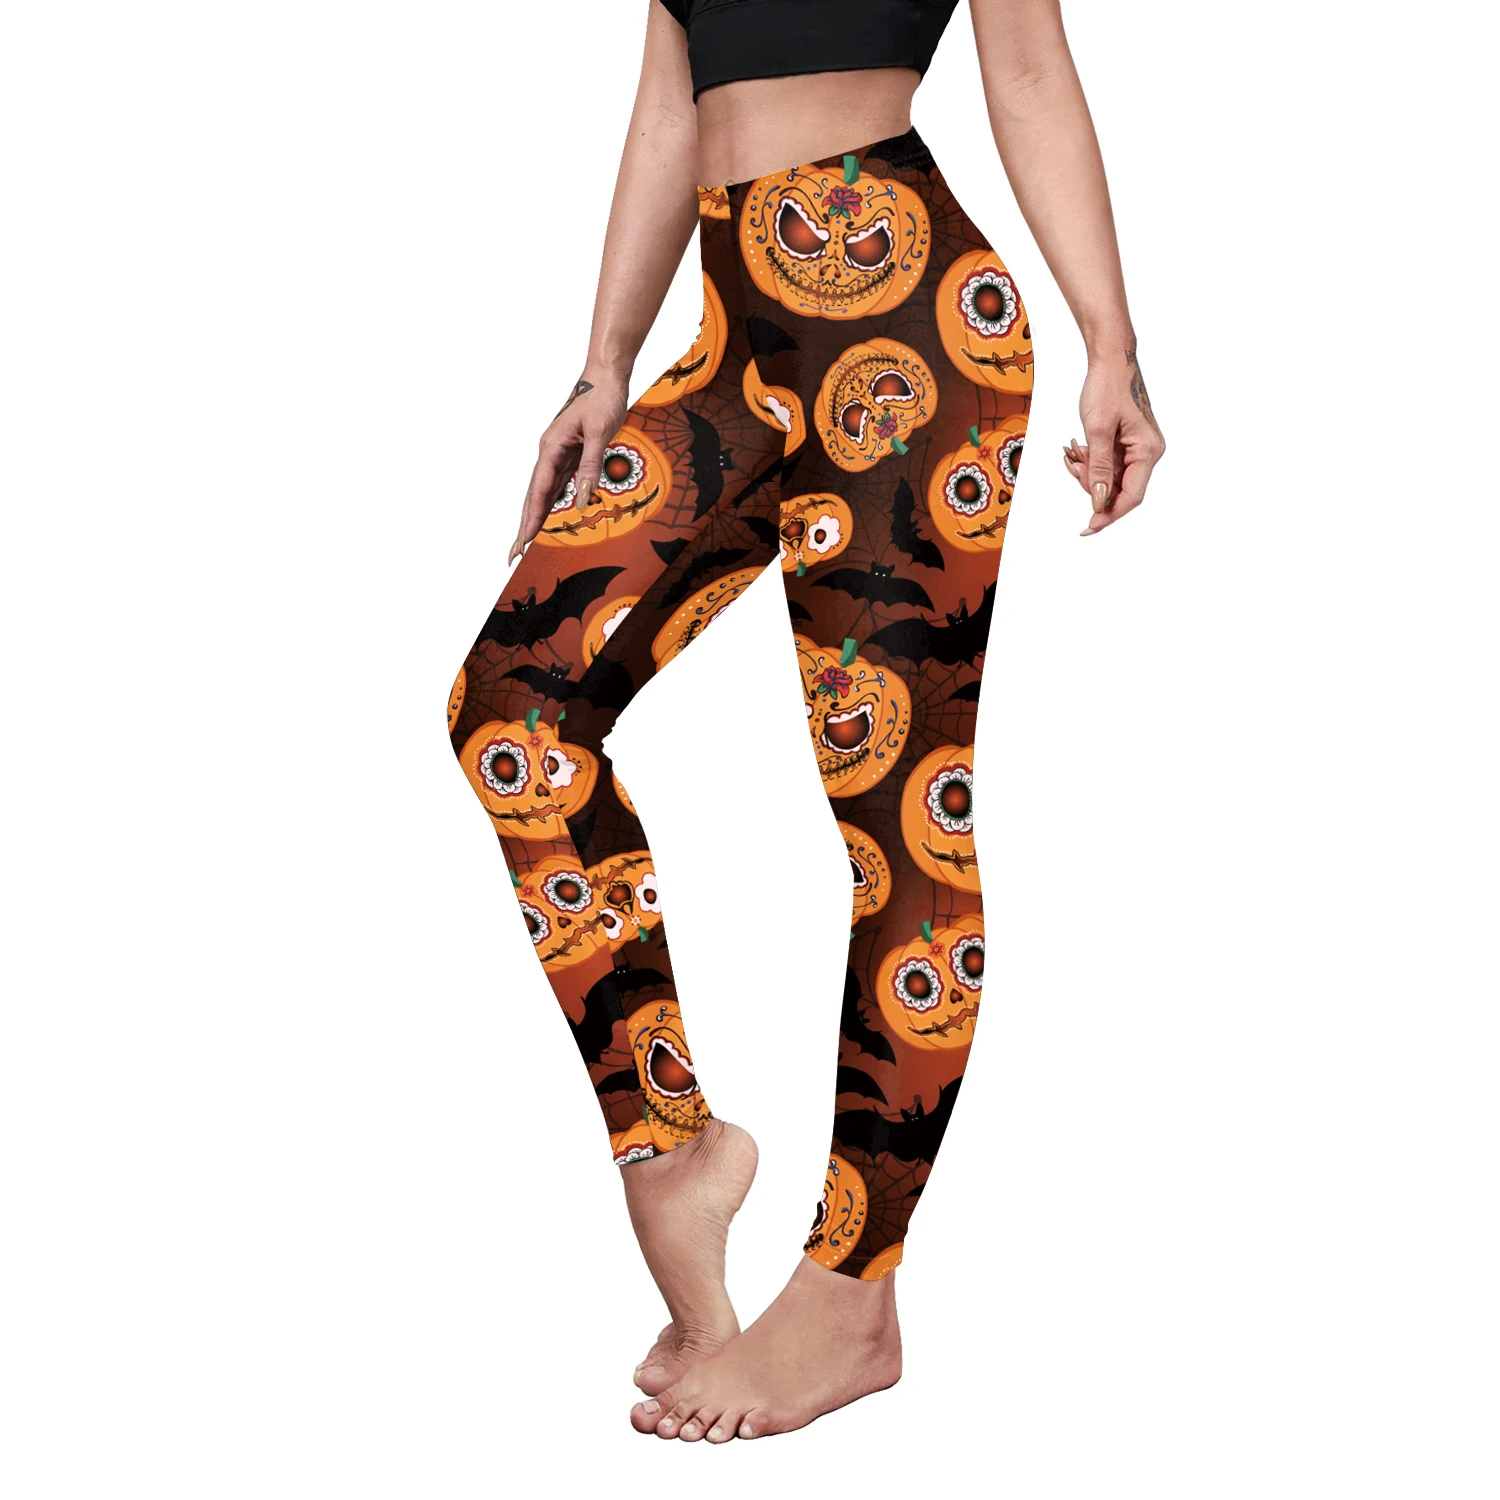 You're My Secret]Halloween Leggings For Women Sexy Flesh-colored